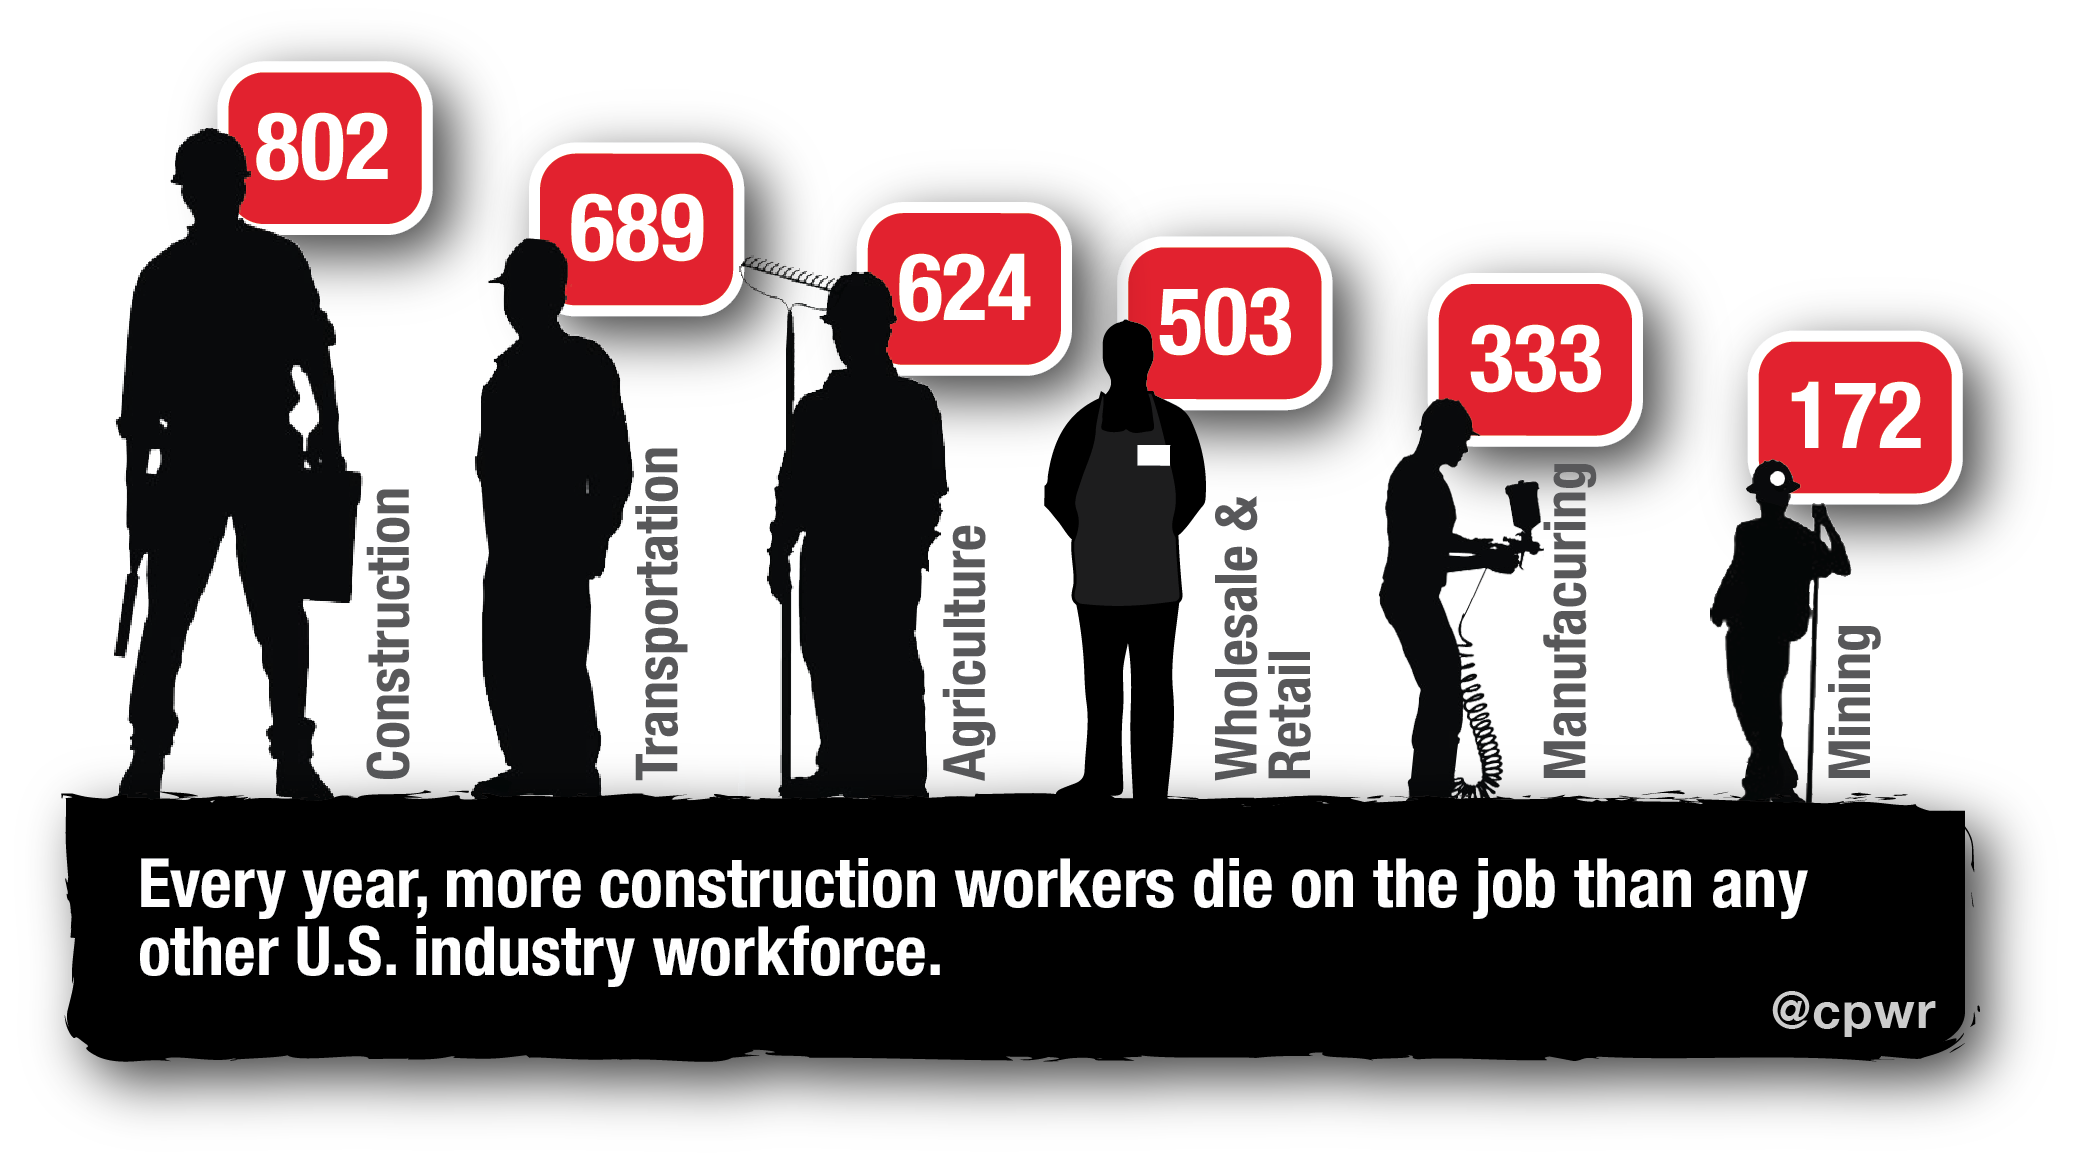 More construction workers die on the job than any other U.S. workforce